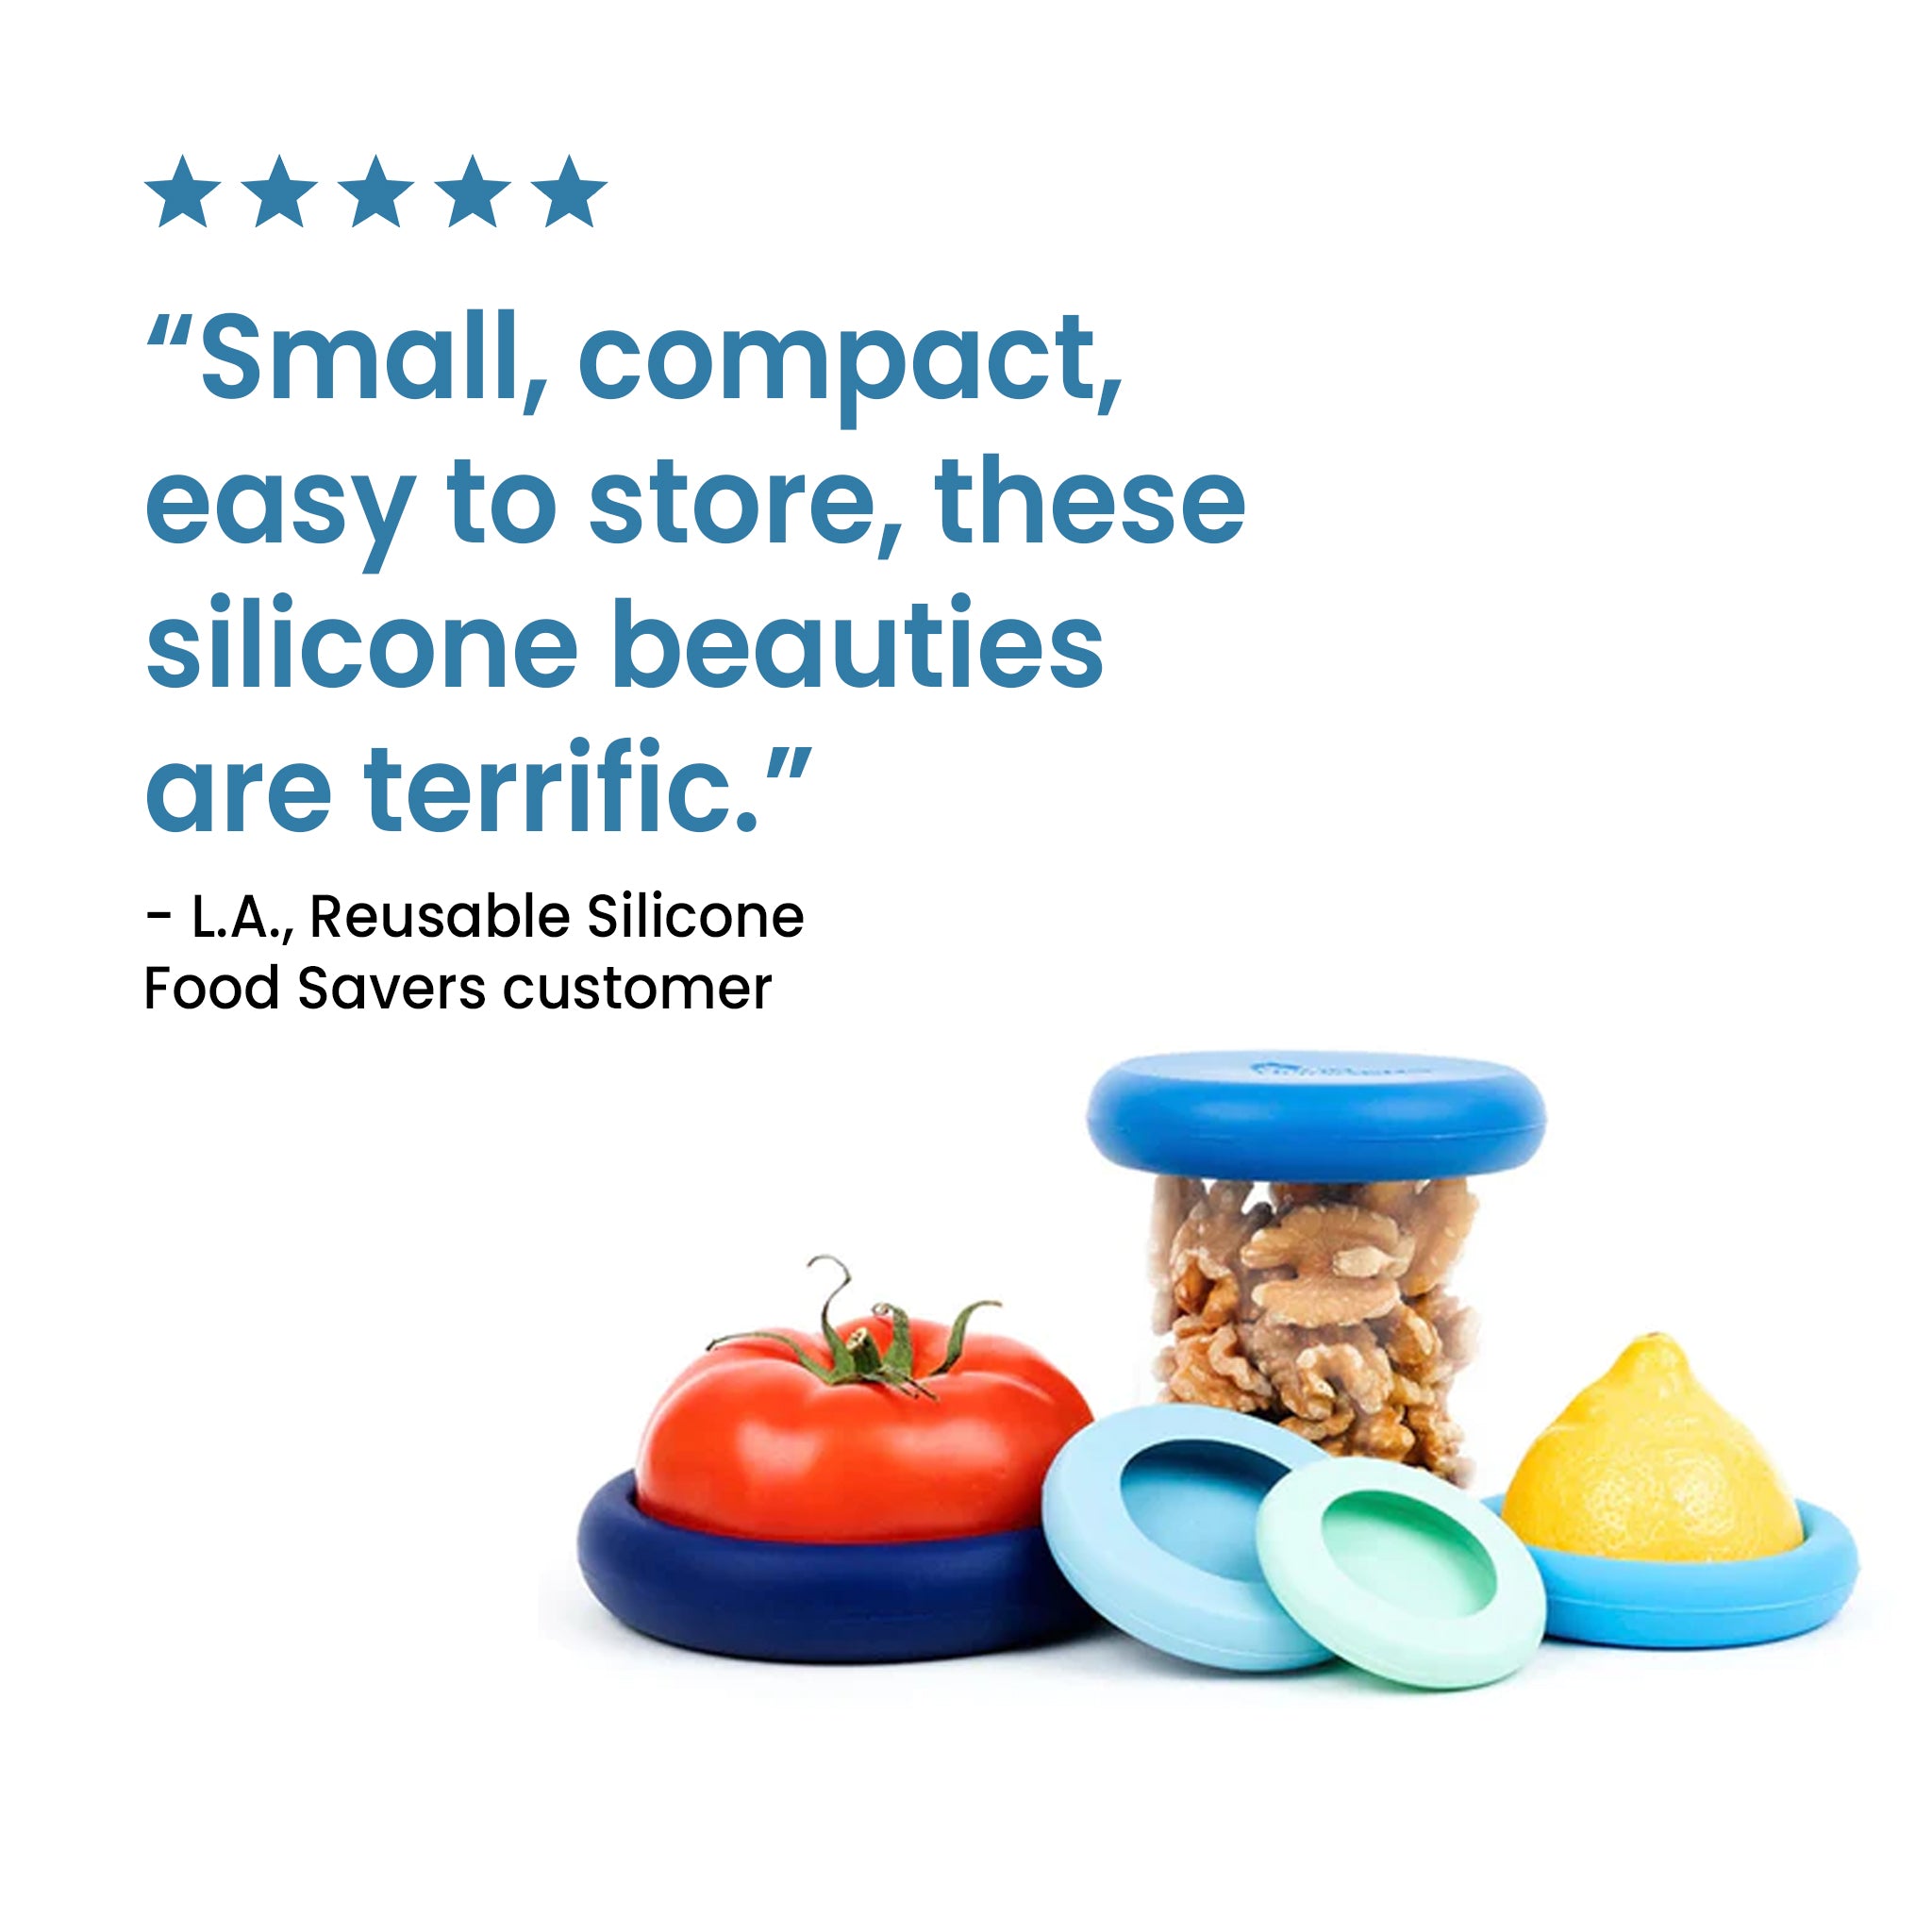 https://cdn.shopify.com/s/files/1/0127/9207/0208/products/reusable-silicone-food-savers-review-v1.jpg?v=1665692927